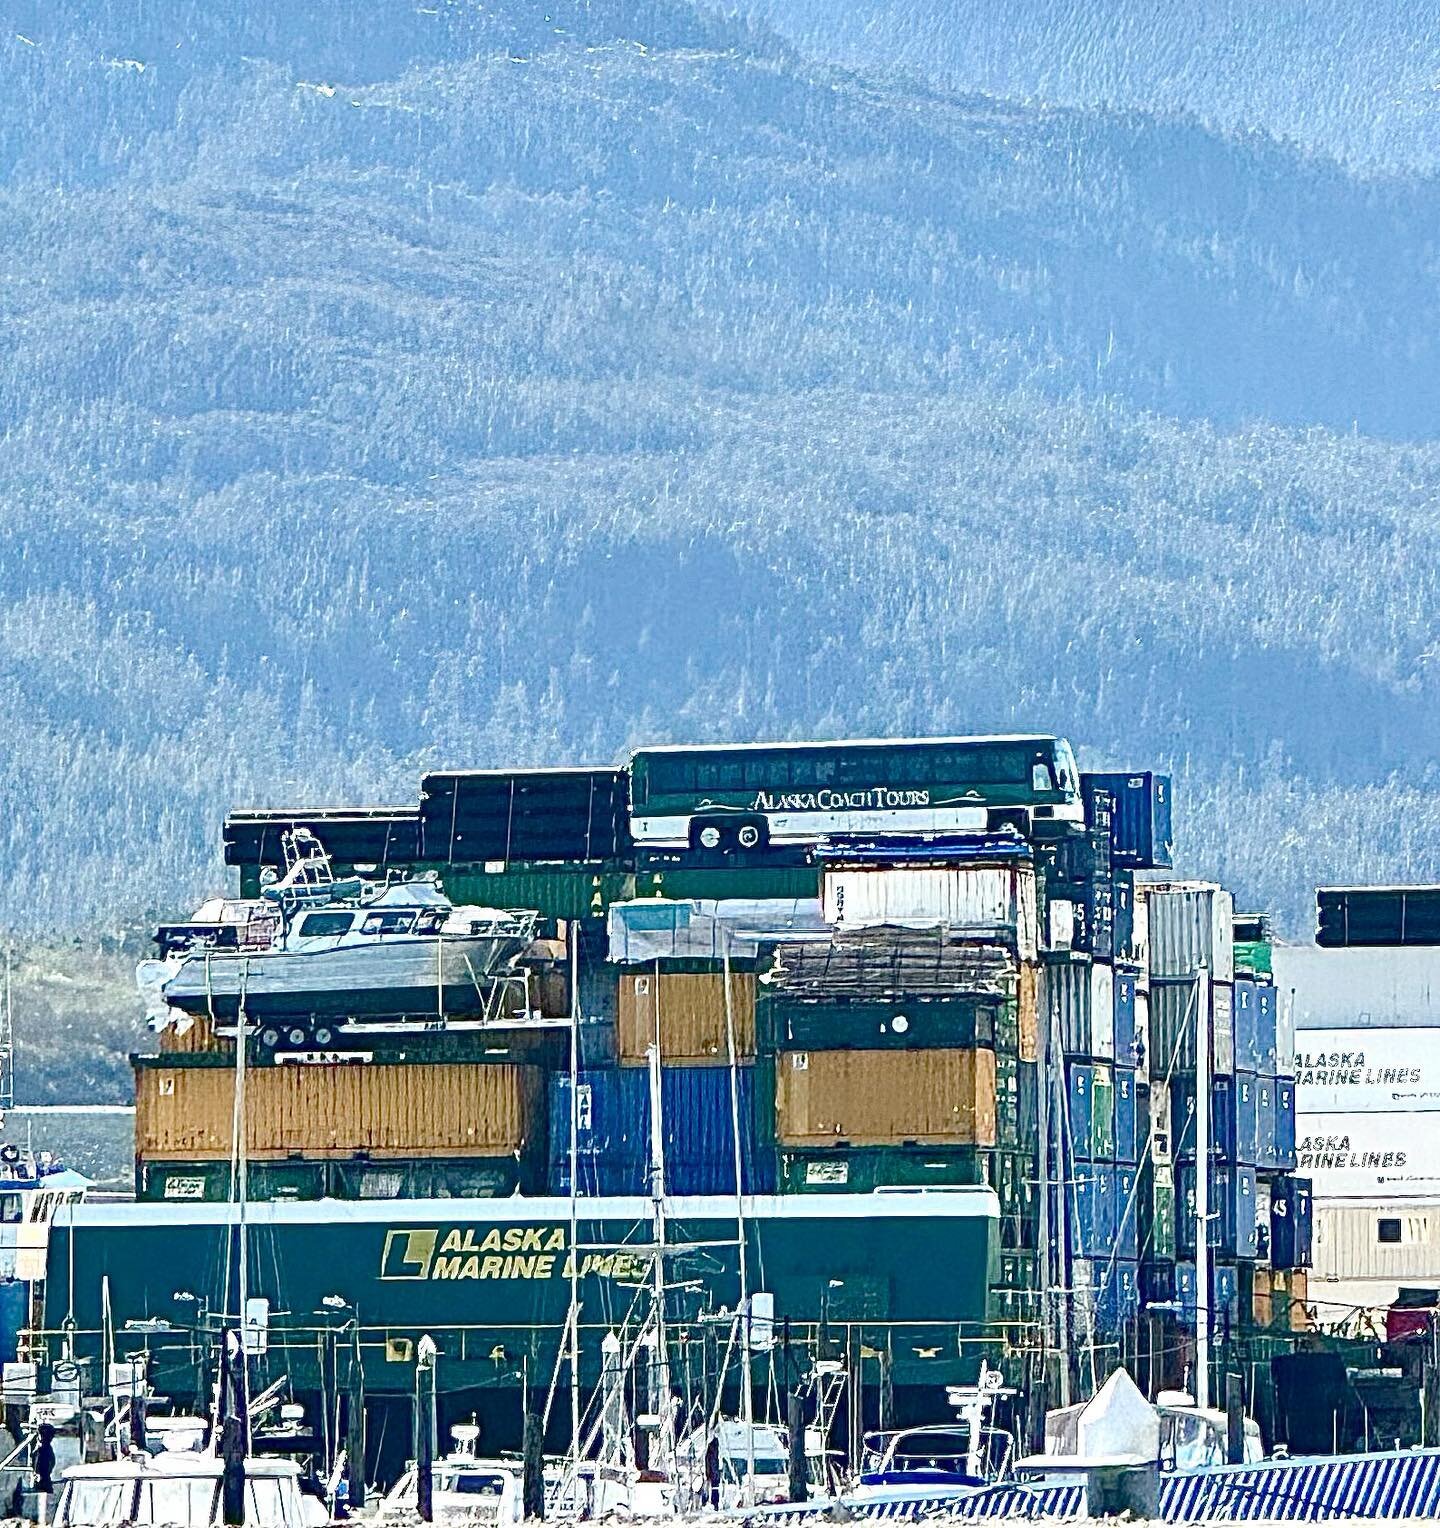 Southeast Alaska is not easily accessible by road. Only three towns in SE AK have road access and they happen to be pretty tiny. SE AK relies on barges to supply goods to all communities. Even our trusty motor coaches are transported via barge. It&rs